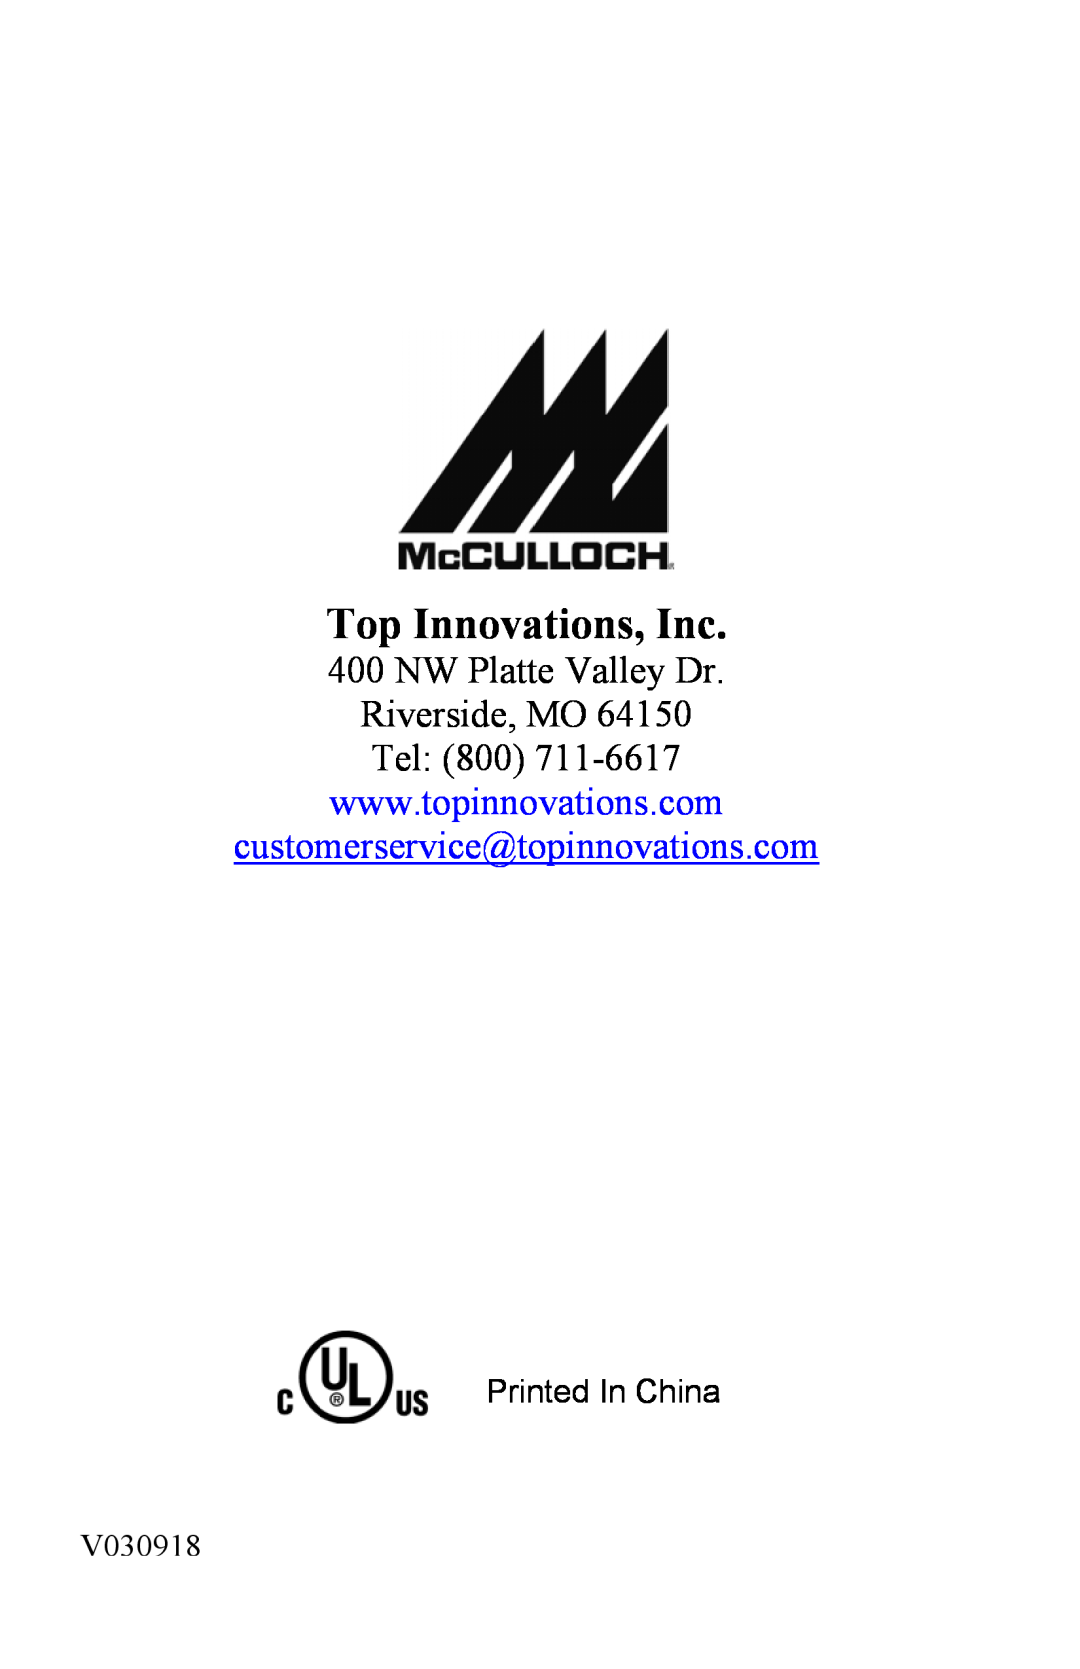 Top Innovations MC1227 Top Innovations, Inc, NW Platte Valley Dr, customerservice@topinnovations.com, Printed In China 